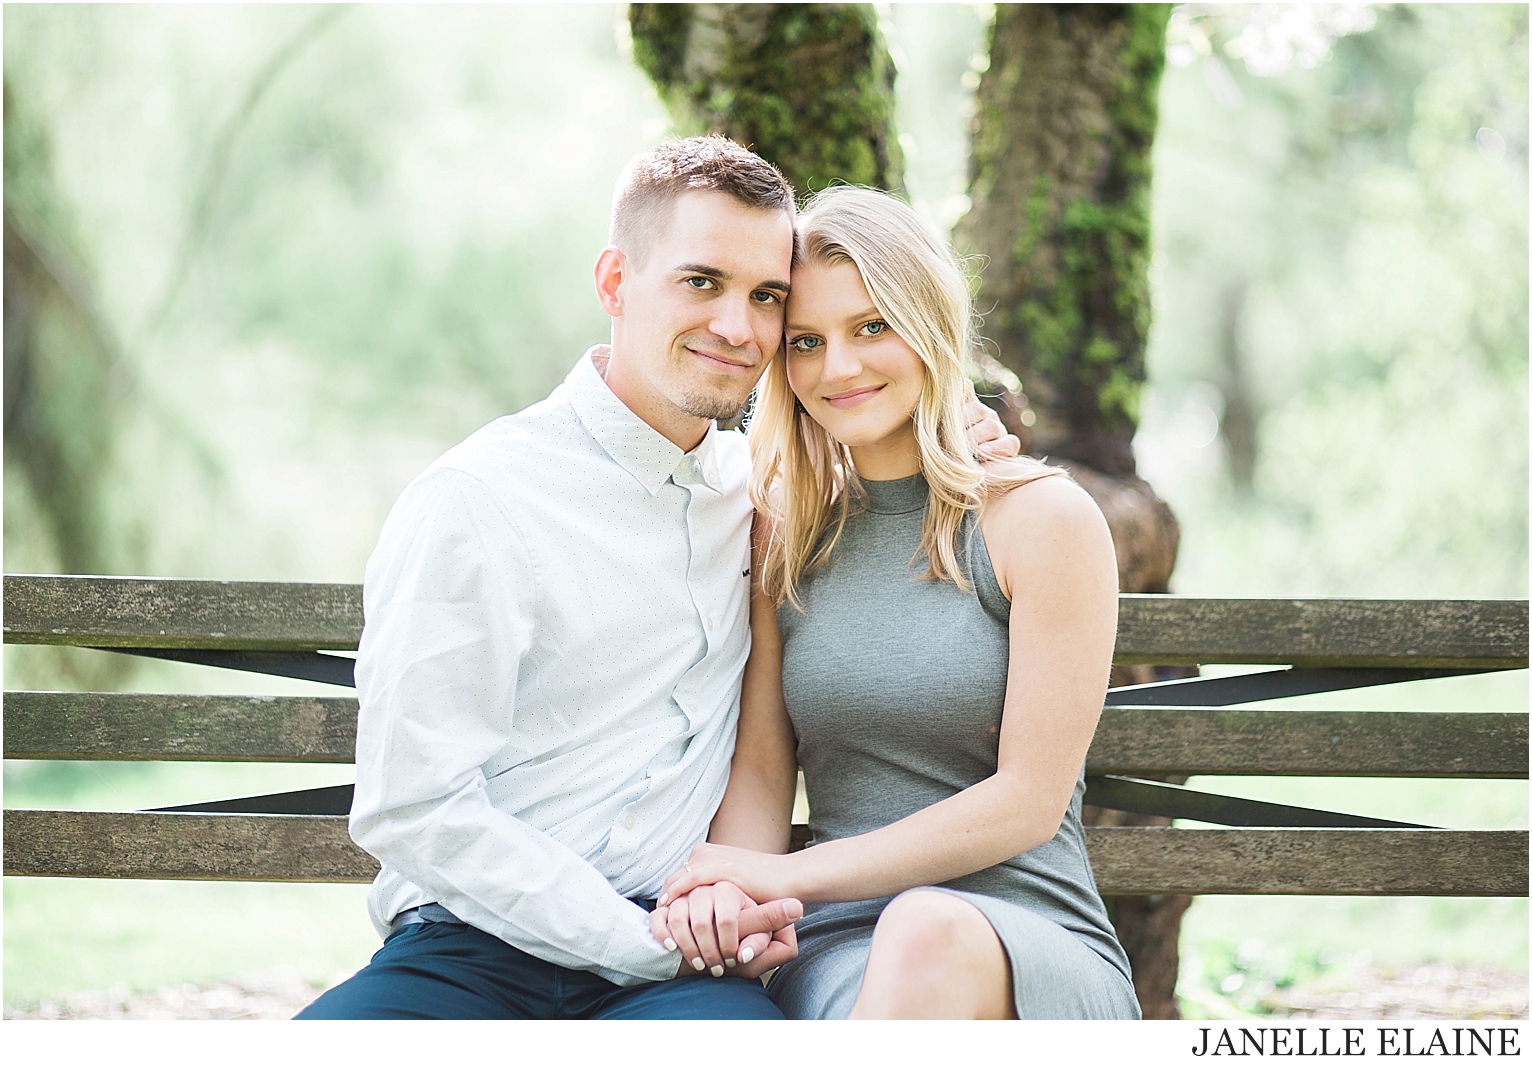 tricia and nate engagement photos-janelle elaine photography-61.jpg